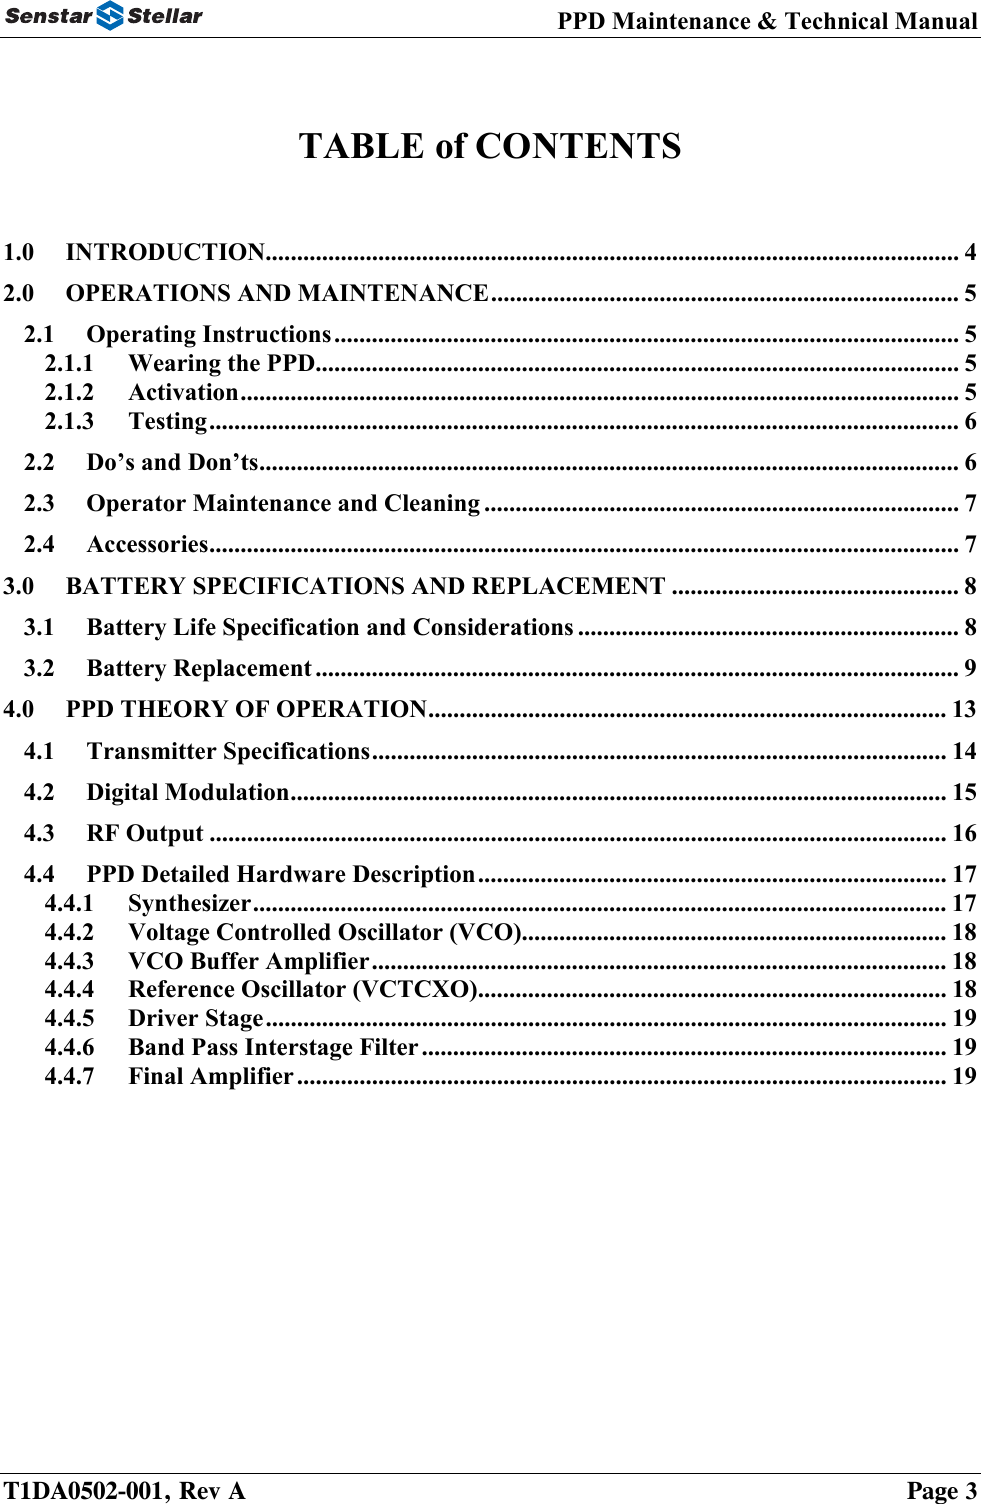 PPD Maintenance &amp; Technical Manual    TABLE of CONTENTS   1.0 INTRODUCTION............................................................................................................... 4 2.0 OPERATIONS AND MAINTENANCE........................................................................... 5 2.1 Operating Instructions.................................................................................................... 5 2.1.1 Wearing the PPD....................................................................................................... 5 2.1.2 Activation................................................................................................................... 5 2.1.3 Testing........................................................................................................................ 6 2.2 Do’s and Don’ts................................................................................................................ 6 2.3 Operator Maintenance and Cleaning ............................................................................ 7 2.4 Accessories........................................................................................................................ 7 3.0 BATTERY SPECIFICATIONS AND REPLACEMENT .............................................. 8 3.1 Battery Life Specification and Considerations ............................................................. 8 3.2 Battery Replacement ....................................................................................................... 9 4.0 PPD THEORY OF OPERATION................................................................................... 13 4.1 Transmitter Specifications............................................................................................ 14 4.2 Digital Modulation......................................................................................................... 15 4.3 RF Output ...................................................................................................................... 16 4.4 PPD Detailed Hardware Description........................................................................... 17 4.4.1 Synthesizer............................................................................................................... 17 4.4.2 Voltage Controlled Oscillator (VCO).................................................................... 18 4.4.3 VCO Buffer Amplifier............................................................................................ 18 4.4.4 Reference Oscillator (VCTCXO)........................................................................... 18 4.4.5 Driver Stage............................................................................................................. 19 4.4.6 Band Pass Interstage Filter.................................................................................... 19 4.4.7 Final Amplifier........................................................................................................ 19  T1DA0502-001, Rev A    Page 3 